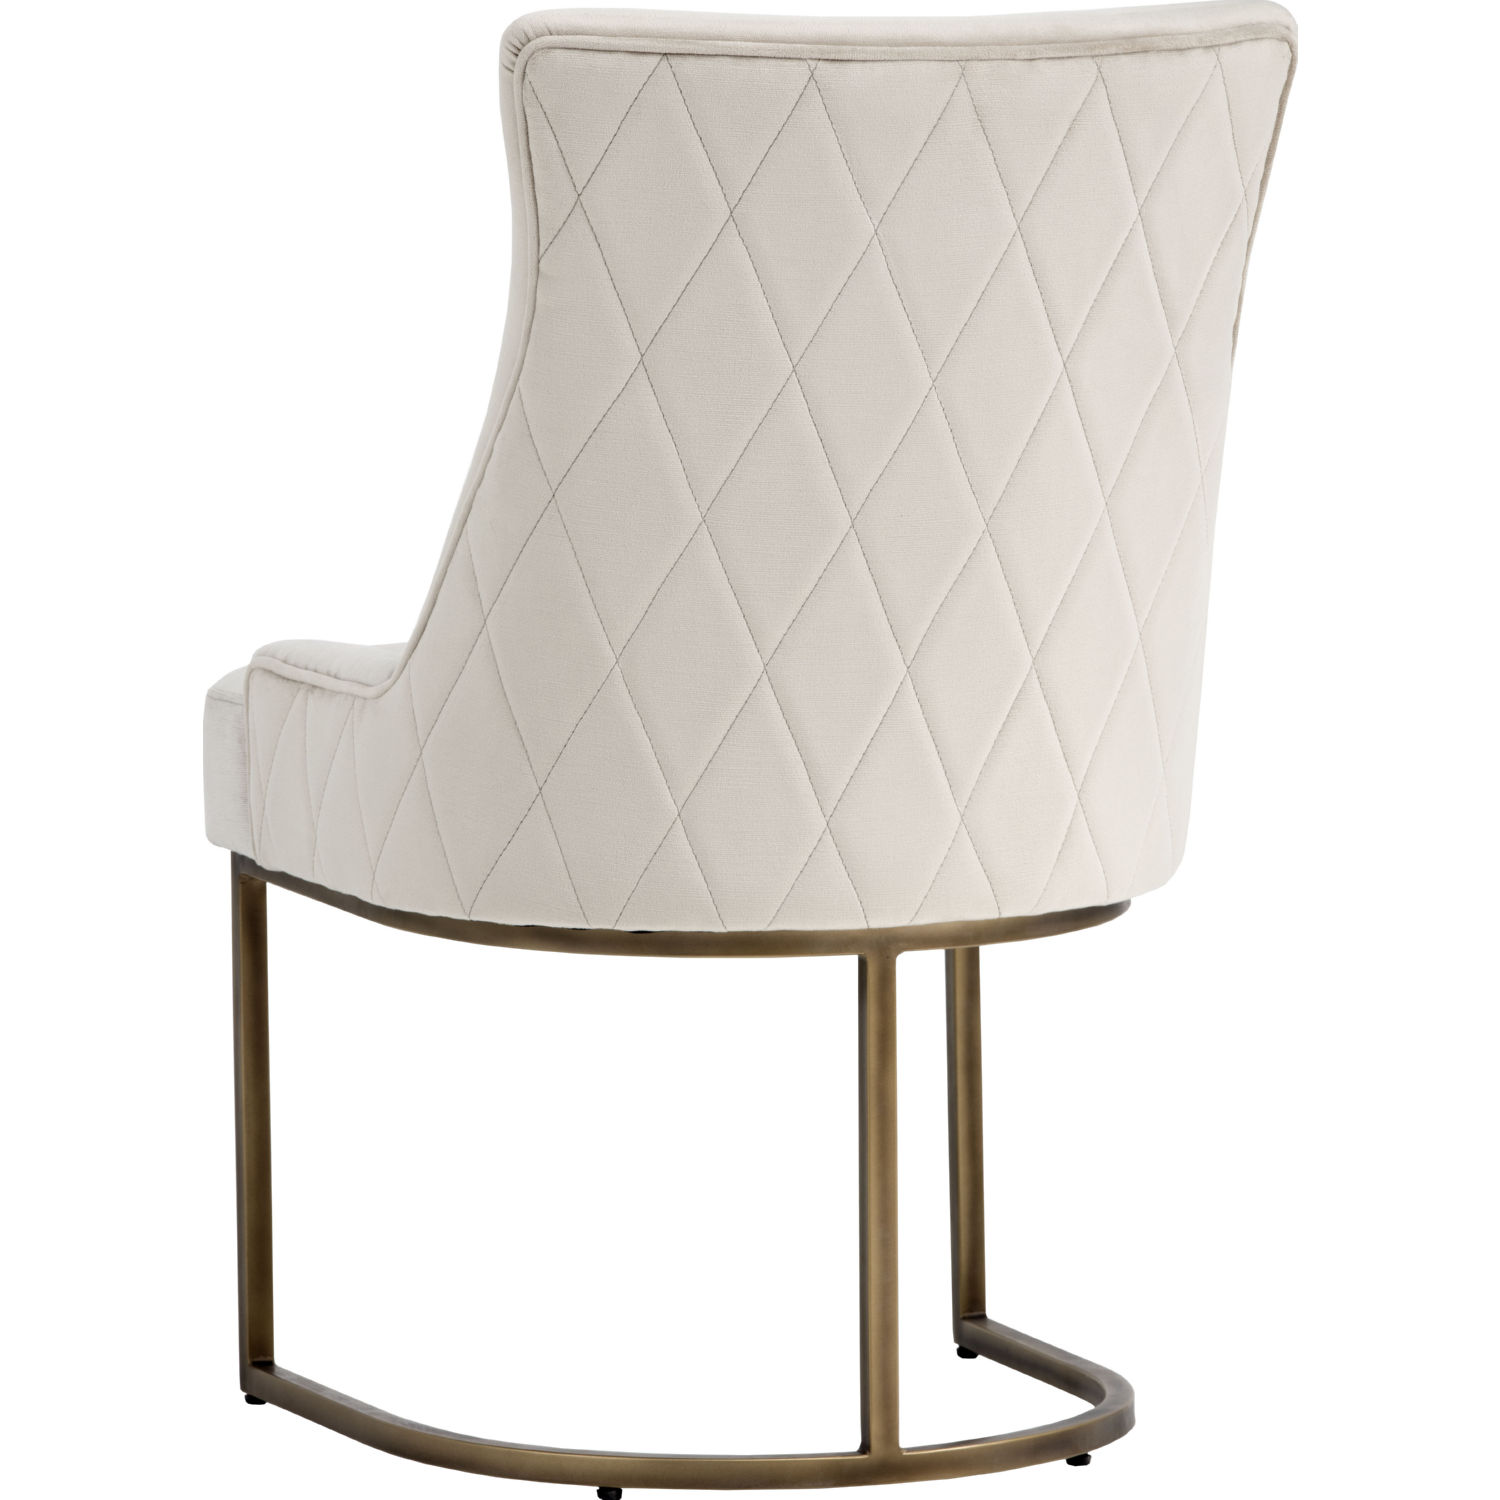 Sunpan 102750 Florence Dining Chair In Prosecco Fabric On Rustic